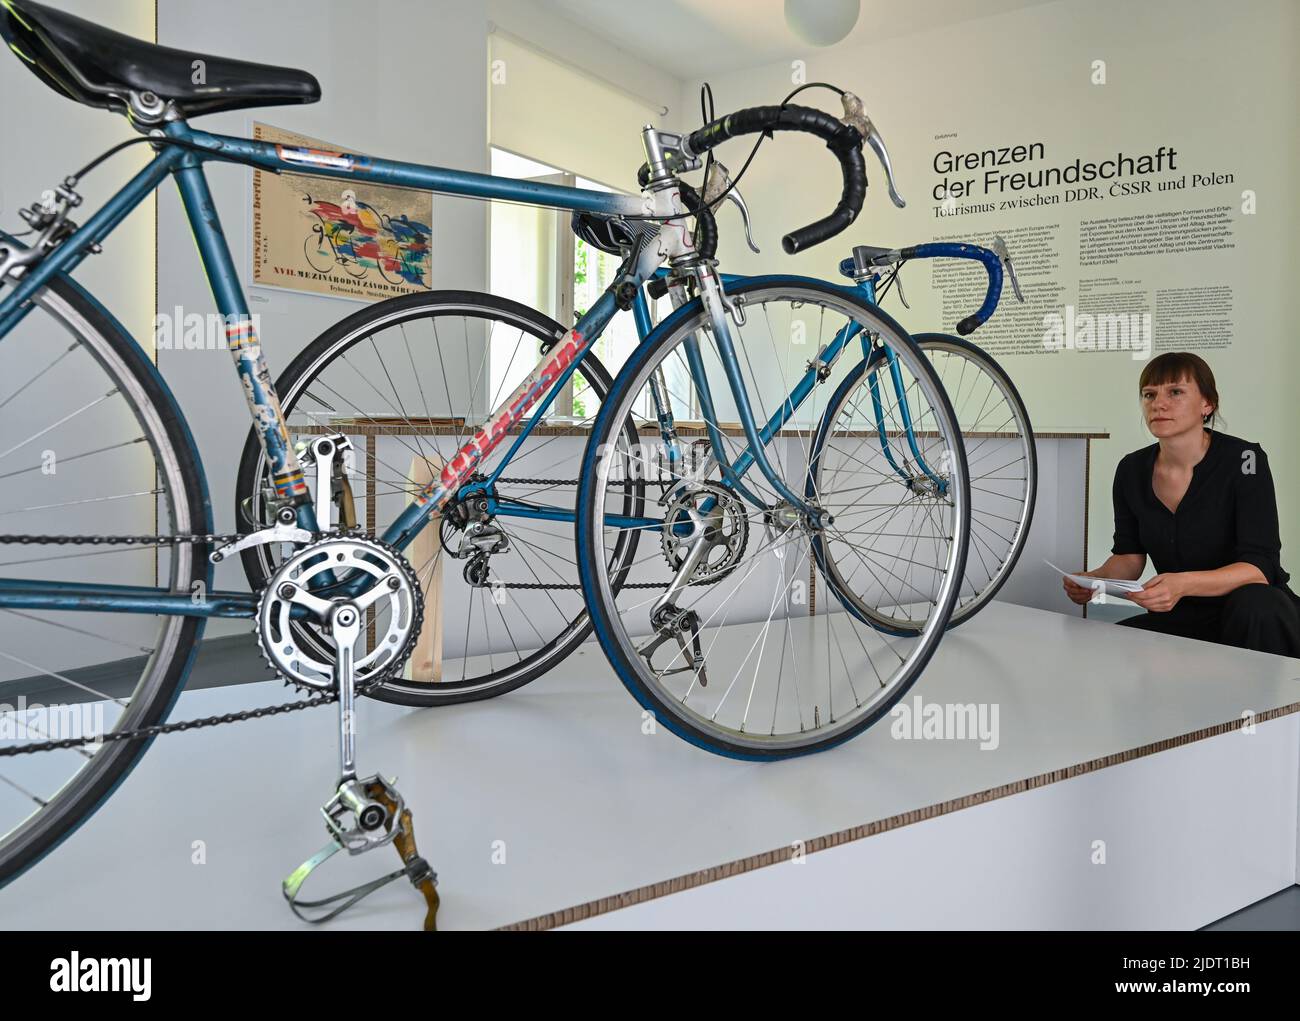 23 June 2022, Brandenburg, Eisenhüttenstadt: Florentine Nadolni, director of the Museum Utopia and Everyday Life, looks at racing bikes from the 1970s and 1980s at the press preview of the exhibition 'Borders of Friendship. Tourism between the GDR, CSSR and Poland' at the Documentation Center for Everyday Culture of the GDR. The 'Iron Curtain' ran through Europe during the Cold War, but the borders between the socialist 'friendship countries' were also a political issue and passable only to a limited extent. In the 1960s, they became somewhat more permeable, but 1972 marked a real breakthrough Stock Photo